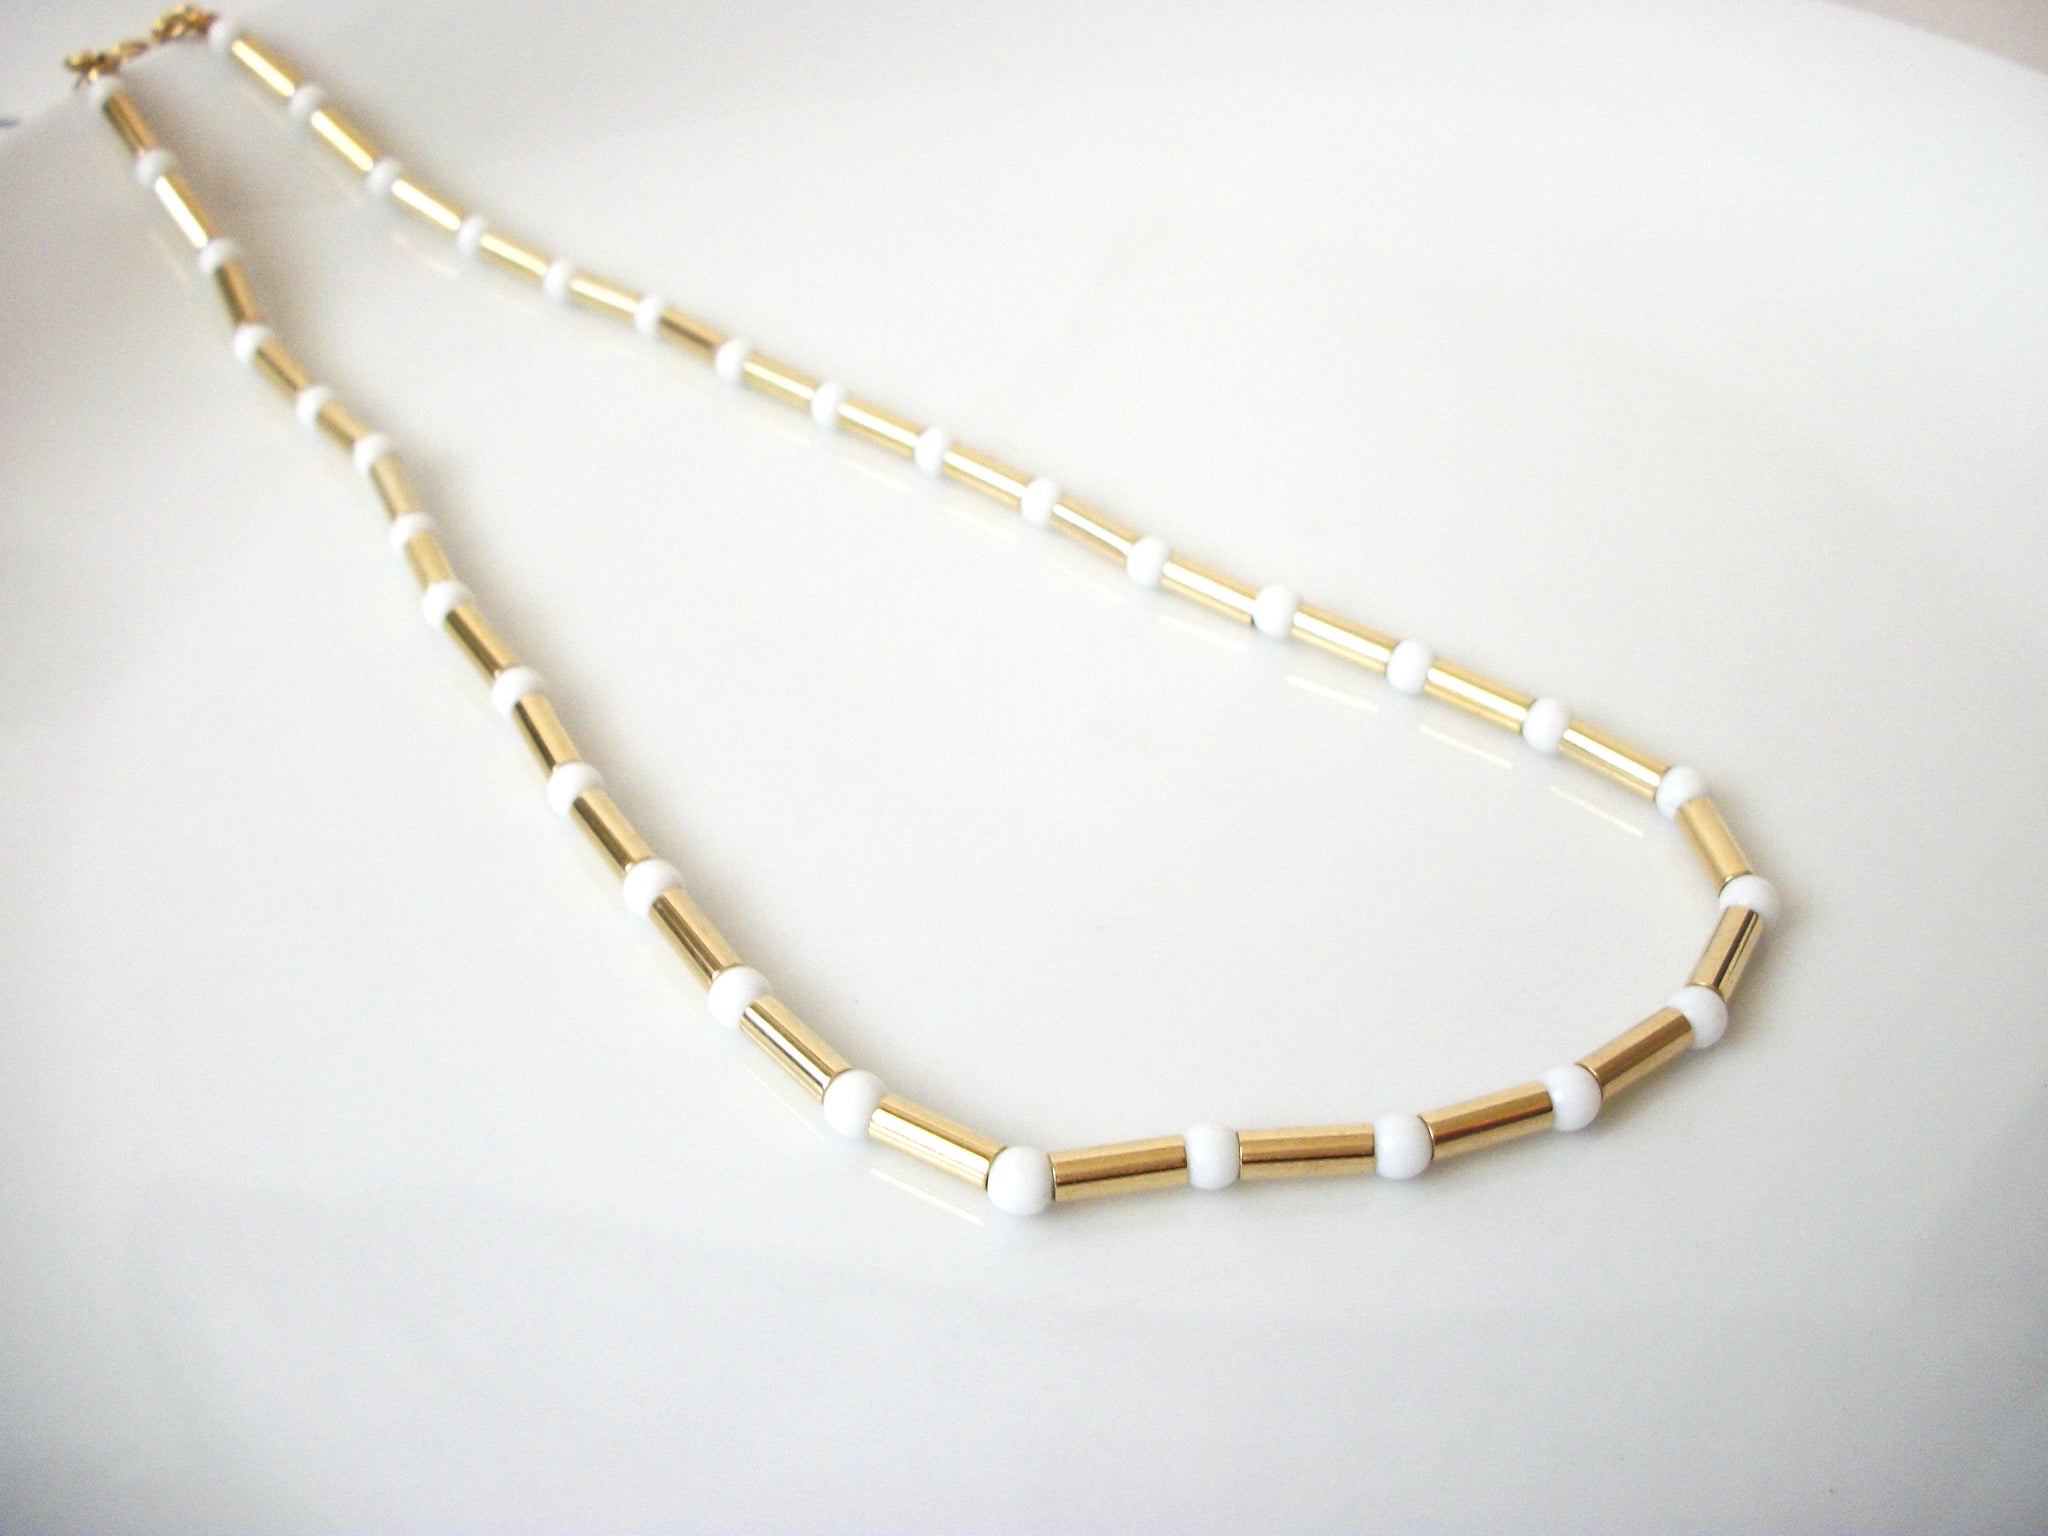 Vintage Gold White Lucite Necklace 83116